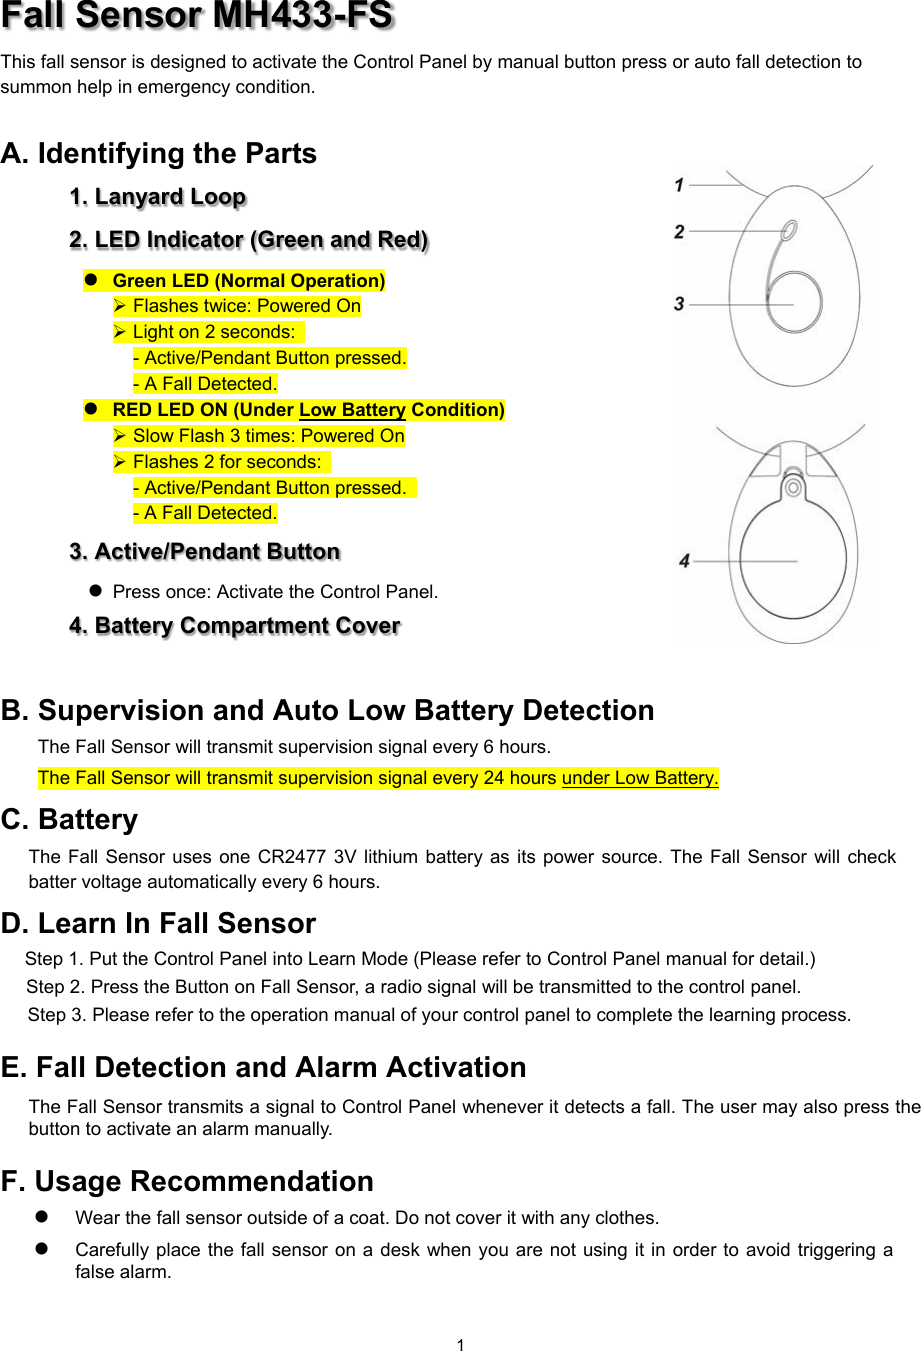  1 Fall Sensor MH433-FS This fall sensor is designed to activate the Control Panel by manual button press or auto fall detection to summon help in emergency condition.    A. Identifying the Parts 1. Lanyard Loop 2. LED Indicator (Green and Red)  Green LED (Normal Operation)  Flashes twice: Powered On  Light on 2 seconds:   - Active/Pendant Button pressed. - A Fall Detected.  RED LED ON (Under Low Battery Condition)  Slow Flash 3 times: Powered On  Flashes 2 for seconds:   - Active/Pendant Button pressed.   - A Fall Detected. 3. Active/Pendant Button    Press once: Activate the Control Panel. 4. Battery Compartment Cover  B. Supervision and Auto Low Battery Detection The Fall Sensor will transmit supervision signal every 6 hours.  The Fall Sensor will transmit supervision signal every 24 hours under Low Battery. C. Battery   The  Fall  Sensor  uses  one CR2477  3V  lithium  battery as its power source. The Fall Sensor  will check batter voltage automatically every 6 hours. D. Learn In Fall Sensor   Step 1. Put the Control Panel into Learn Mode (Please refer to Control Panel manual for detail.) Step 2. Press the Button on Fall Sensor, a radio signal will be transmitted to the control panel. Step 3. Please refer to the operation manual of your control panel to complete the learning process. E. Fall Detection and Alarm Activation The Fall Sensor transmits a signal to Control Panel whenever it detects a fall. The user may also press the button to activate an alarm manually. F. Usage Recommendation    Wear the fall sensor outside of a coat. Do not cover it with any clothes.      Carefully place the fall sensor on a desk when  you are not  using it in  order to avoid triggering a false alarm.   